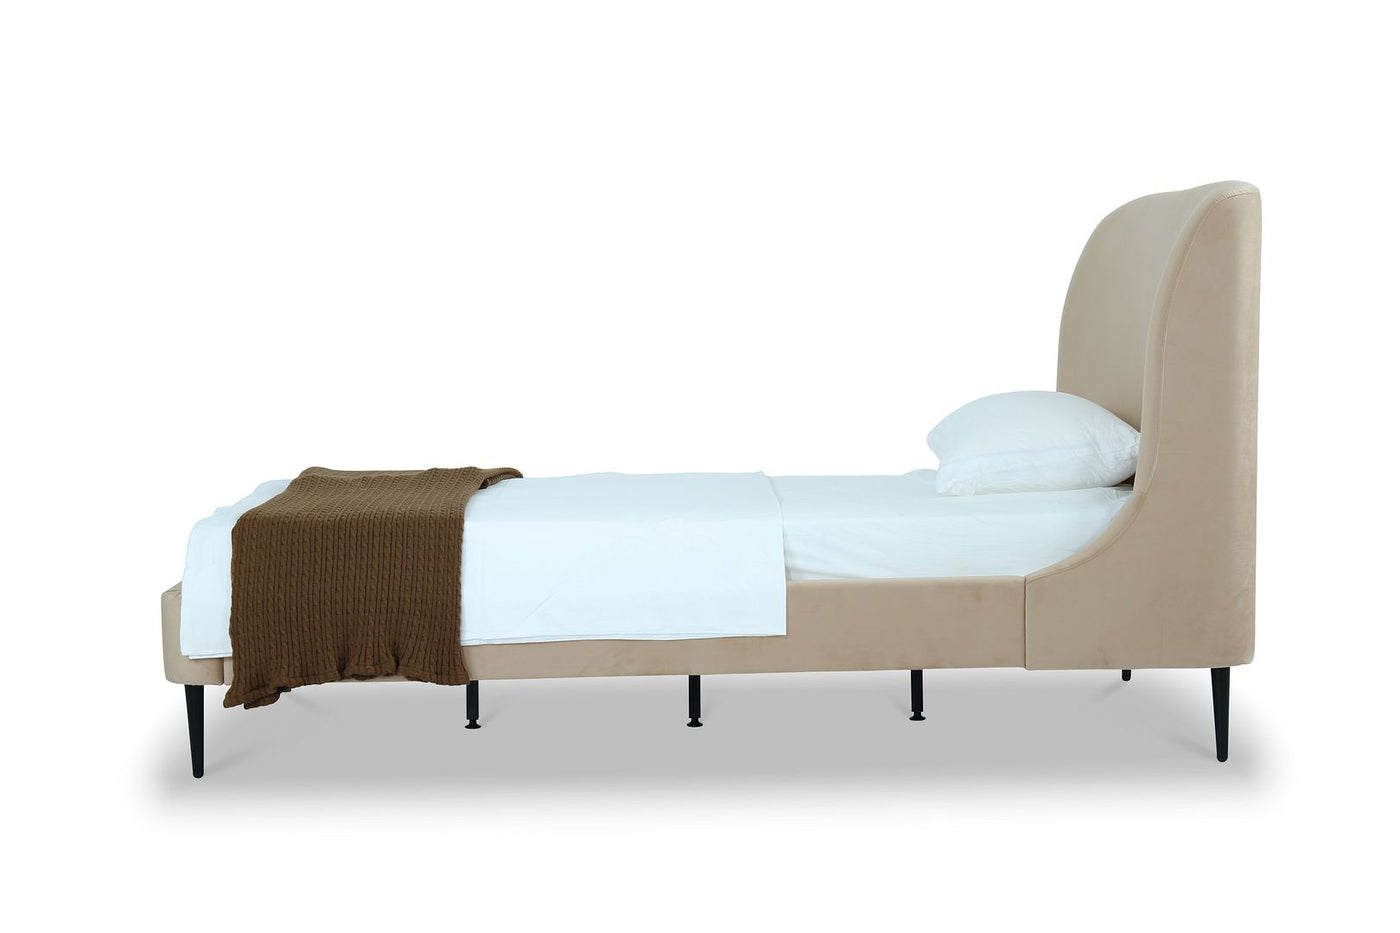 Stege Twin Bed - Taupe with Black Legs